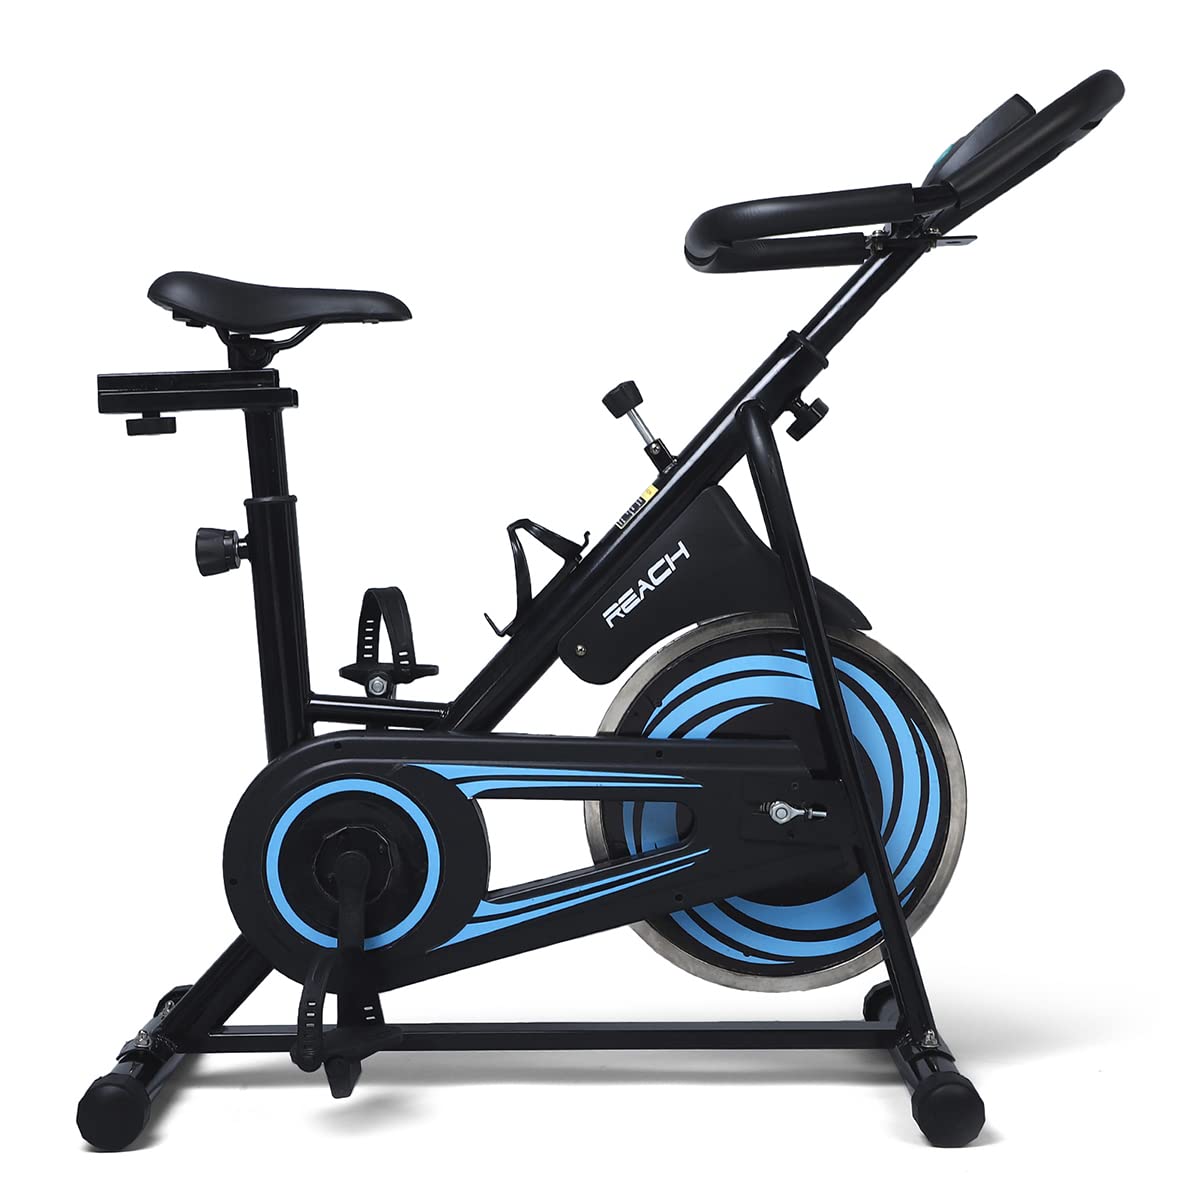 ELEV8 by Reach Vision MII Spin Bike | 6.5 Kg Flywheel | 7 levels of Adjustable Resistance | LCD Monitor | Fitness Cycle for Home Gym | Ideal for Lower Body & Tummy Workout | Max User Weight 110kg